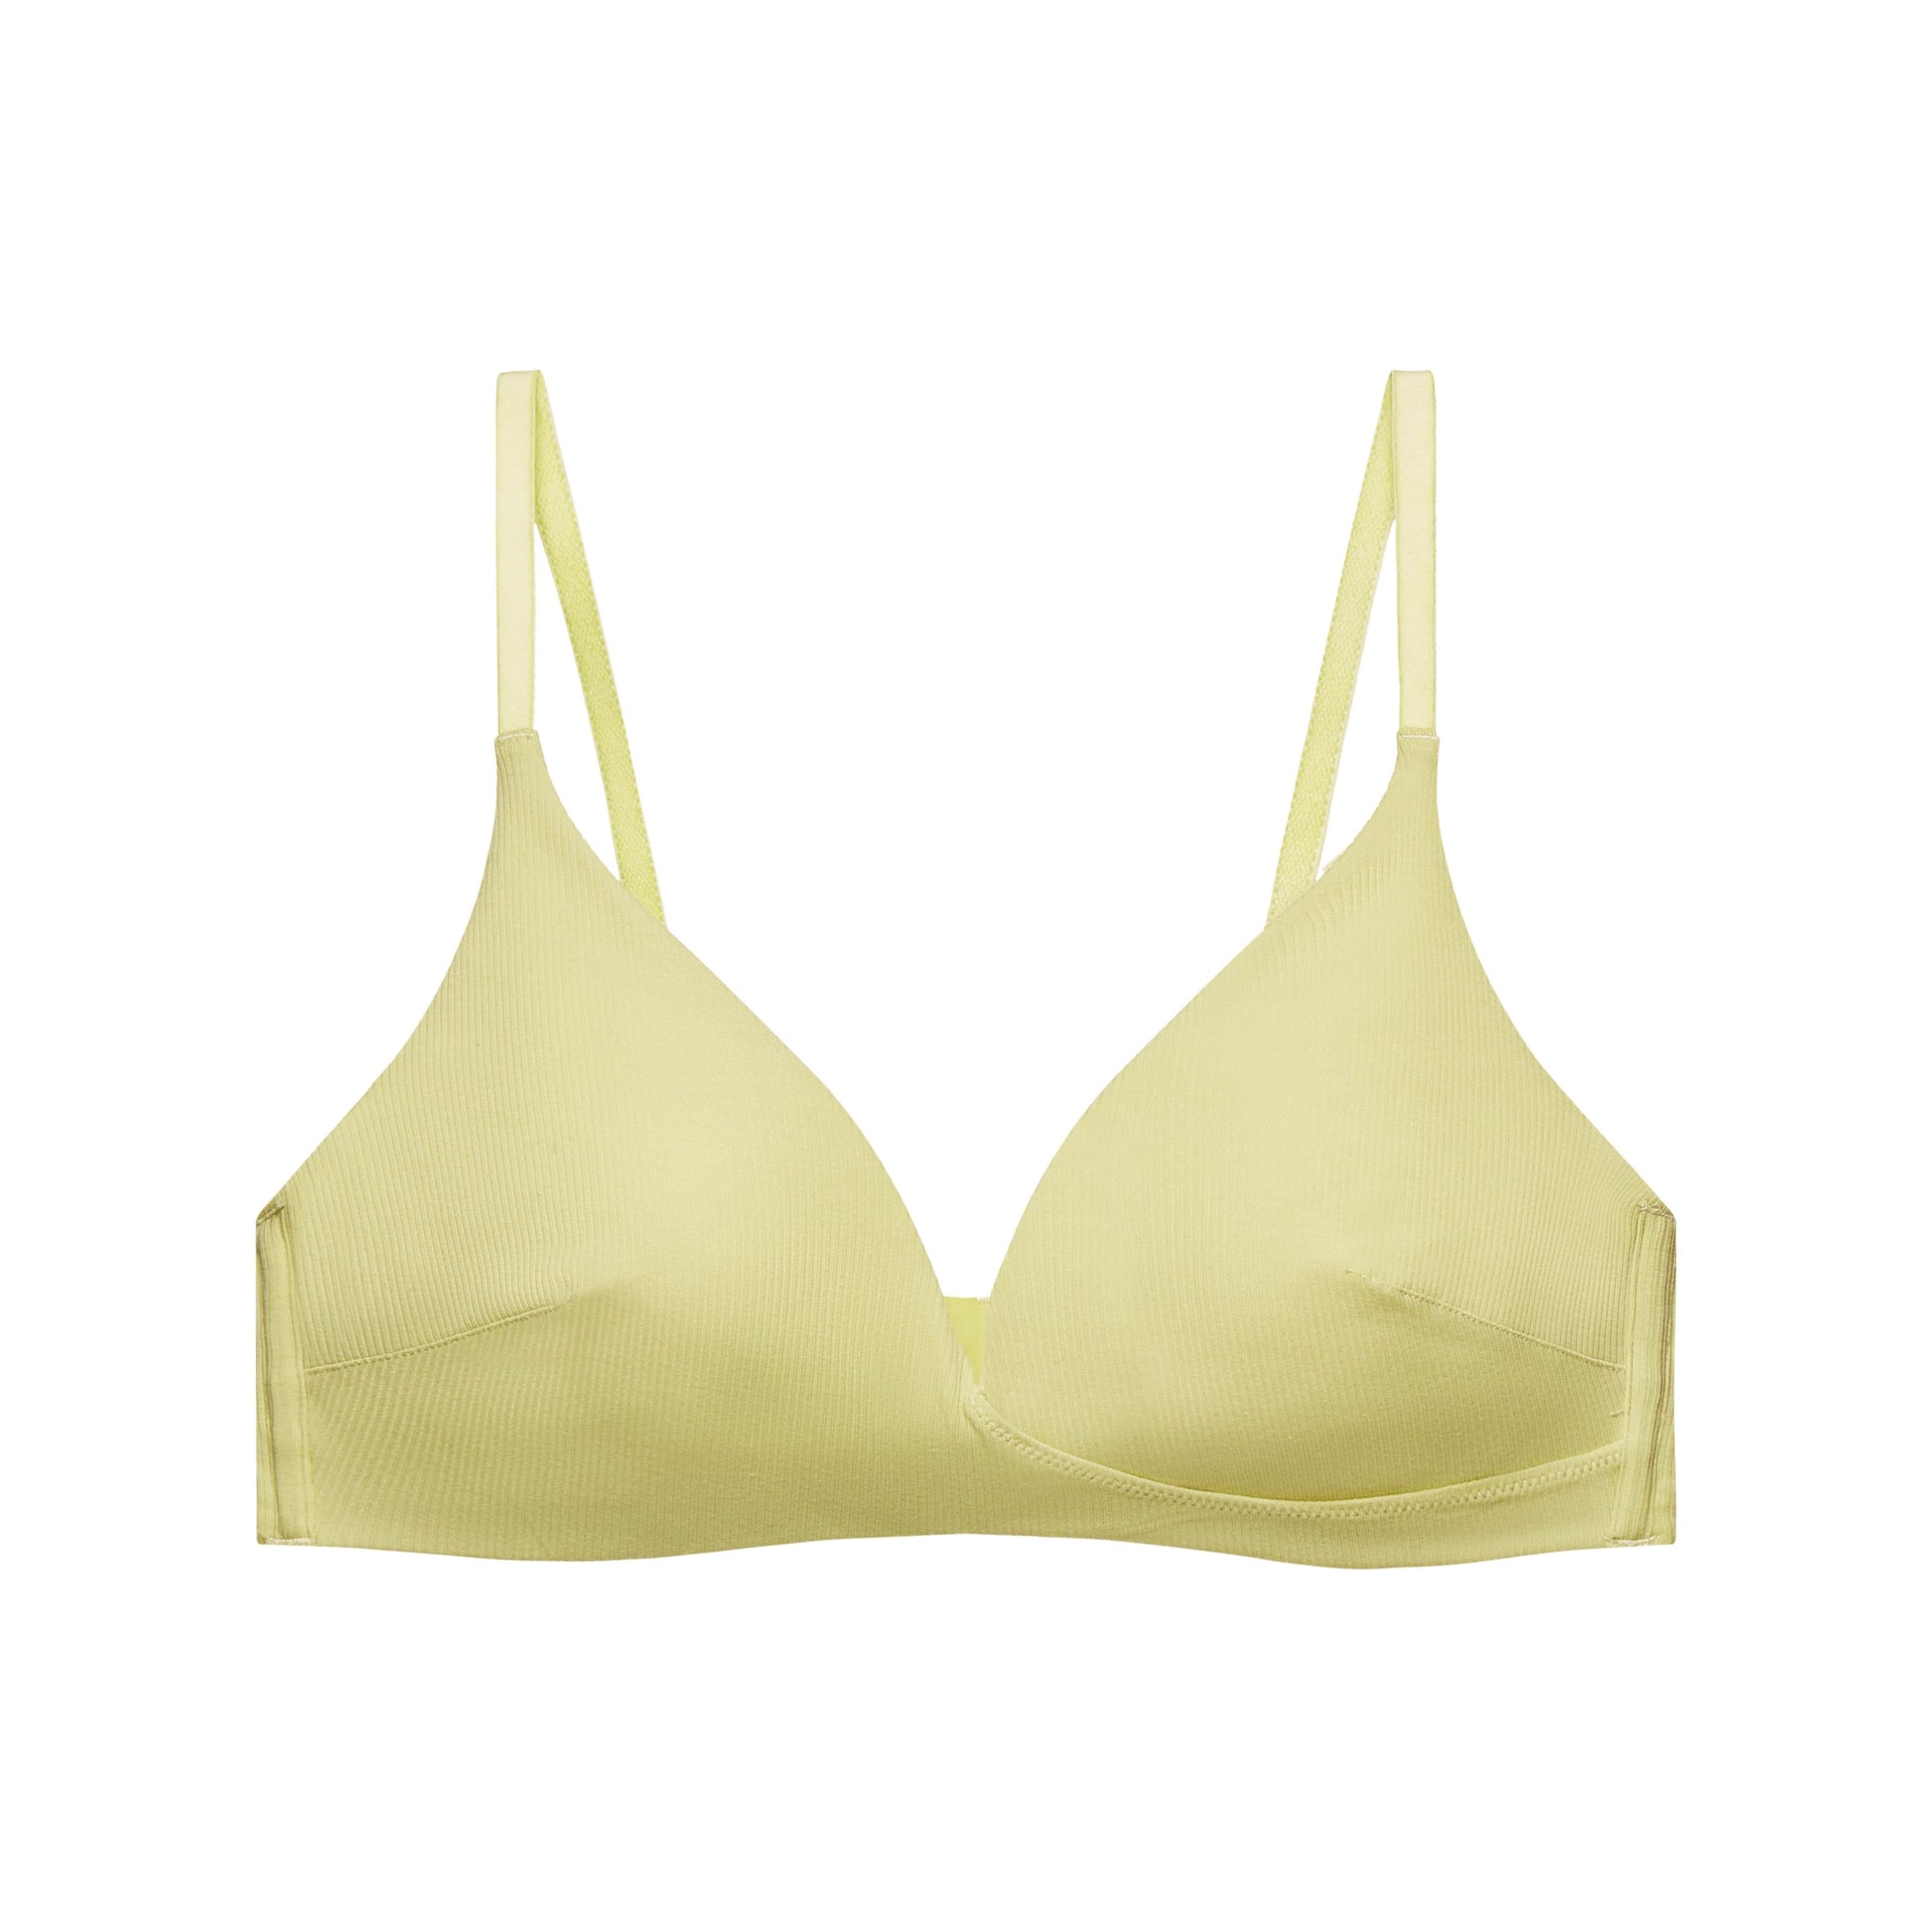 QUYUON Balconette Bra Women's Underwear Thin Large Size No Sponge WIRE-Free  Breathable Anti-sagging Bunny Cup Bra Active Fit Sleeping Bras Yellow 4XL 